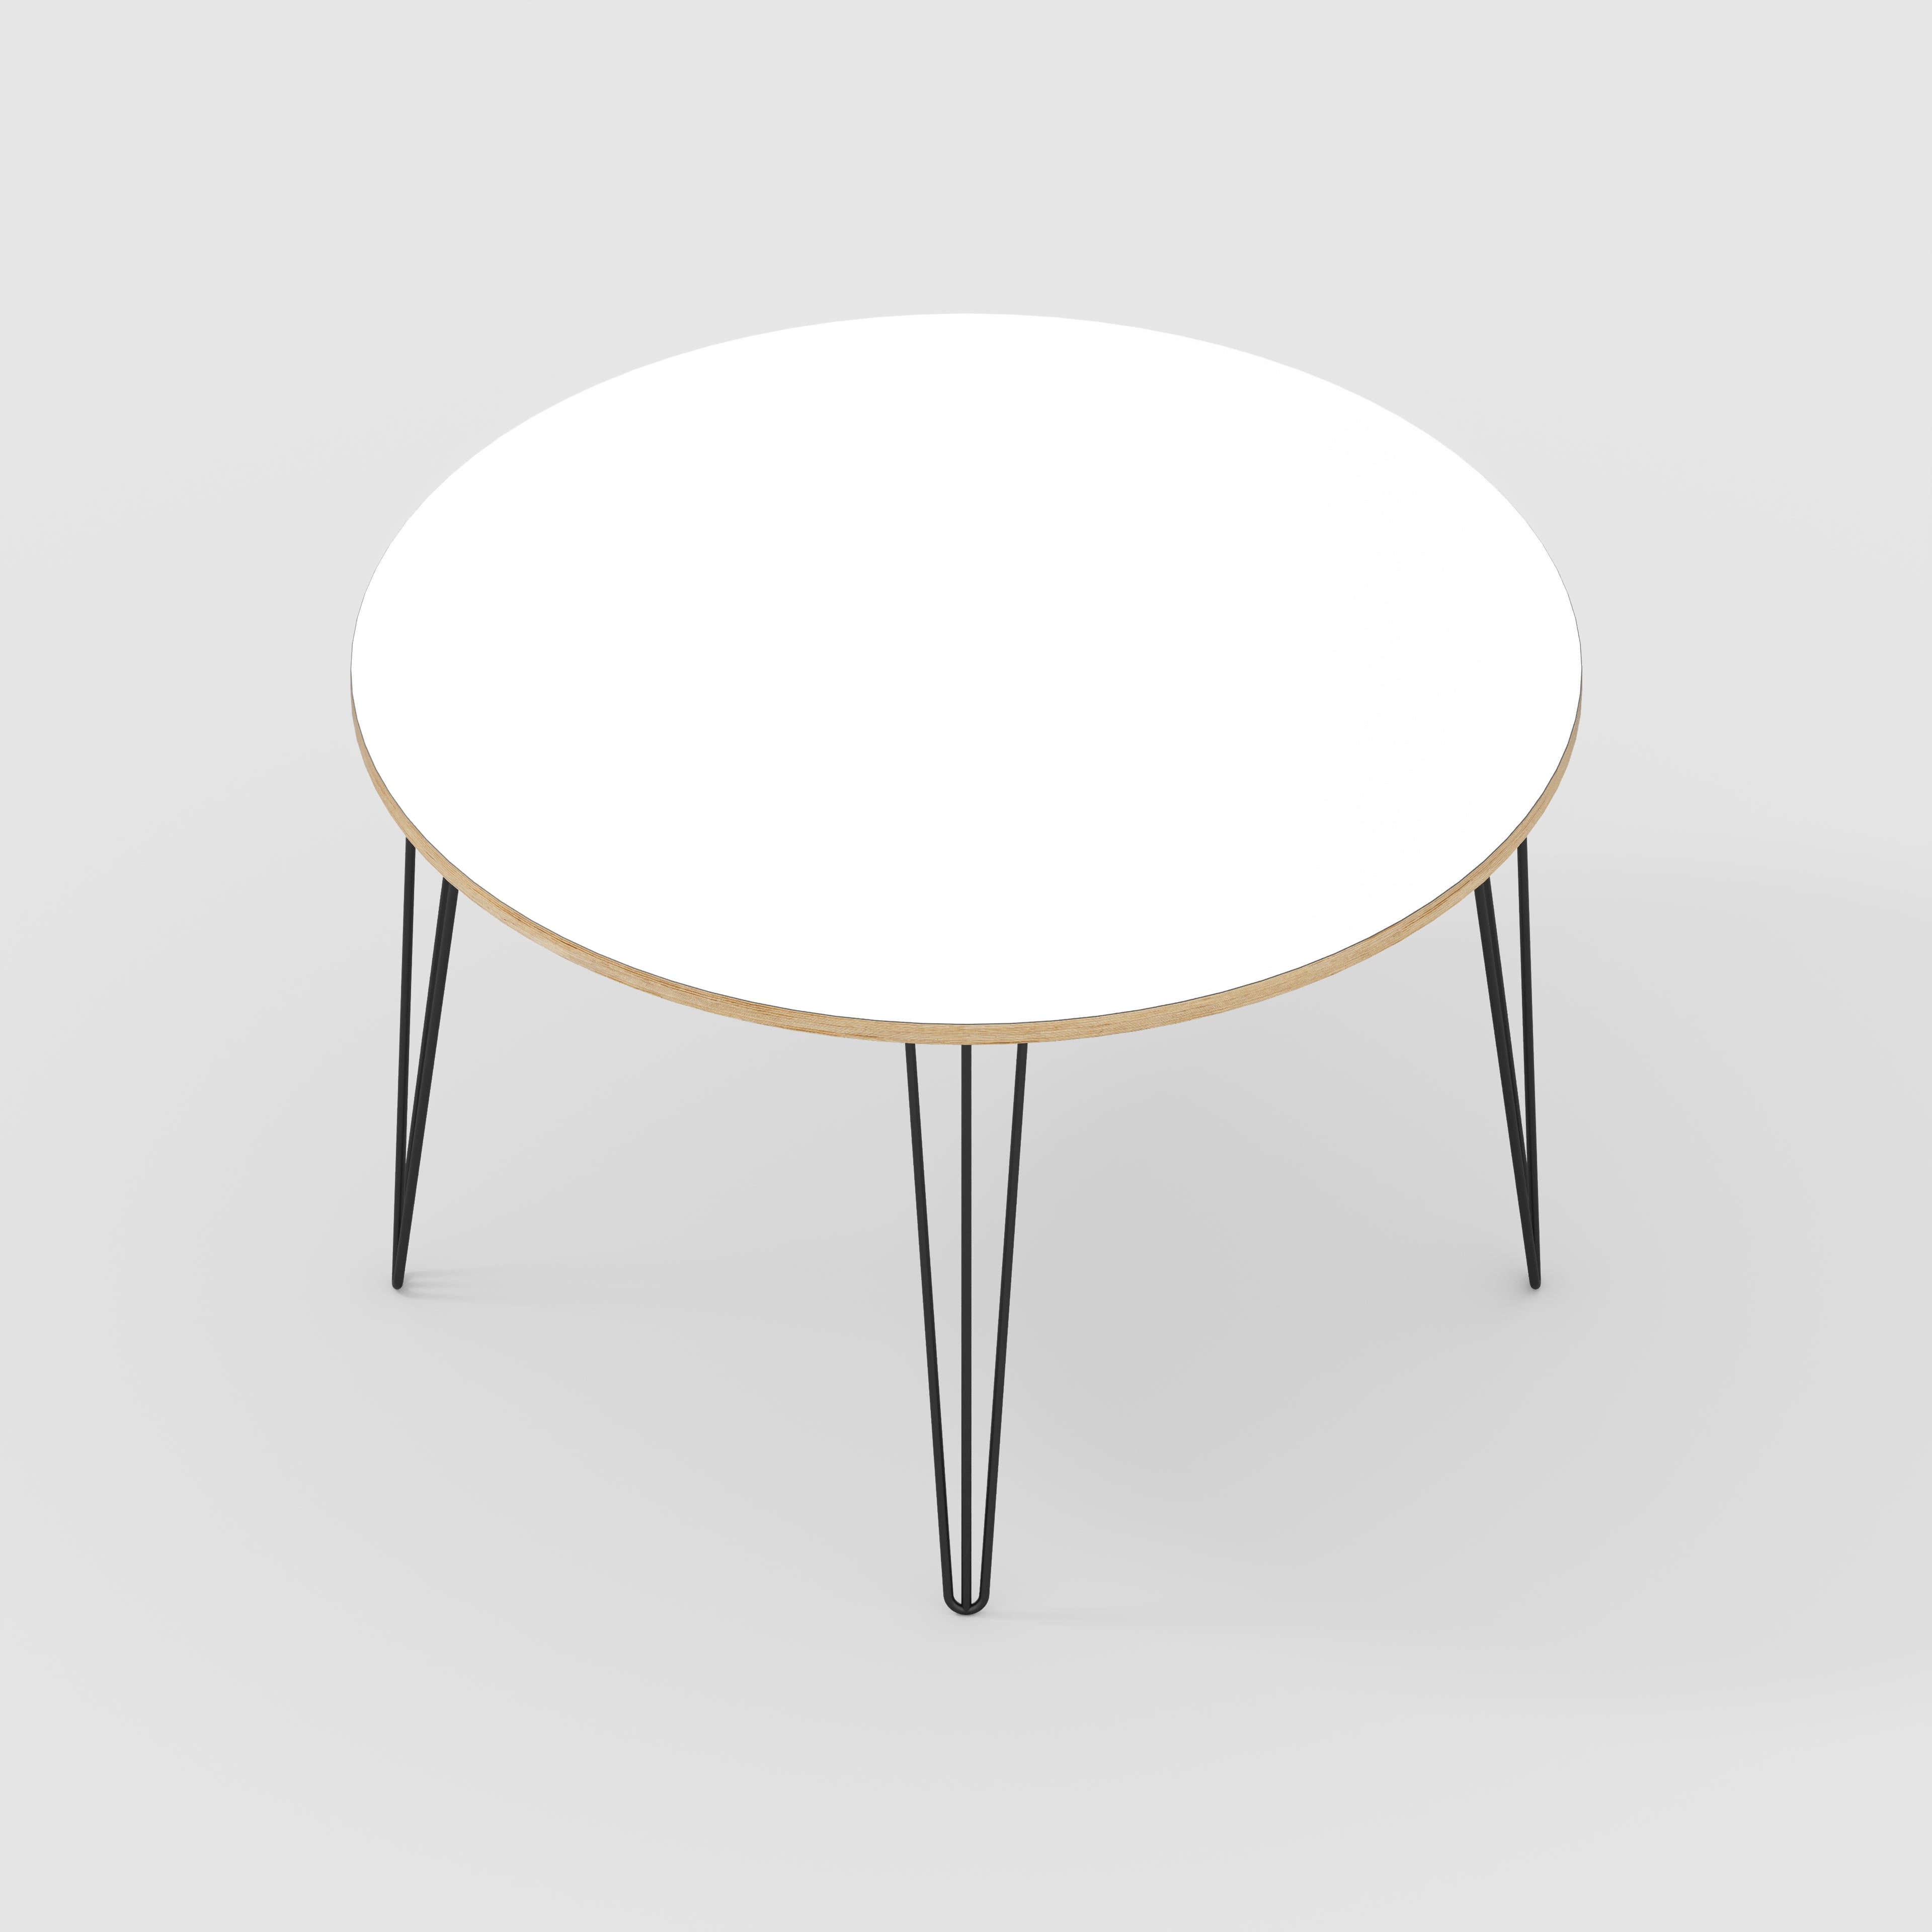 Round Table with Black Hairpin Legs - Formica White - 1200(dia) x 735(h)